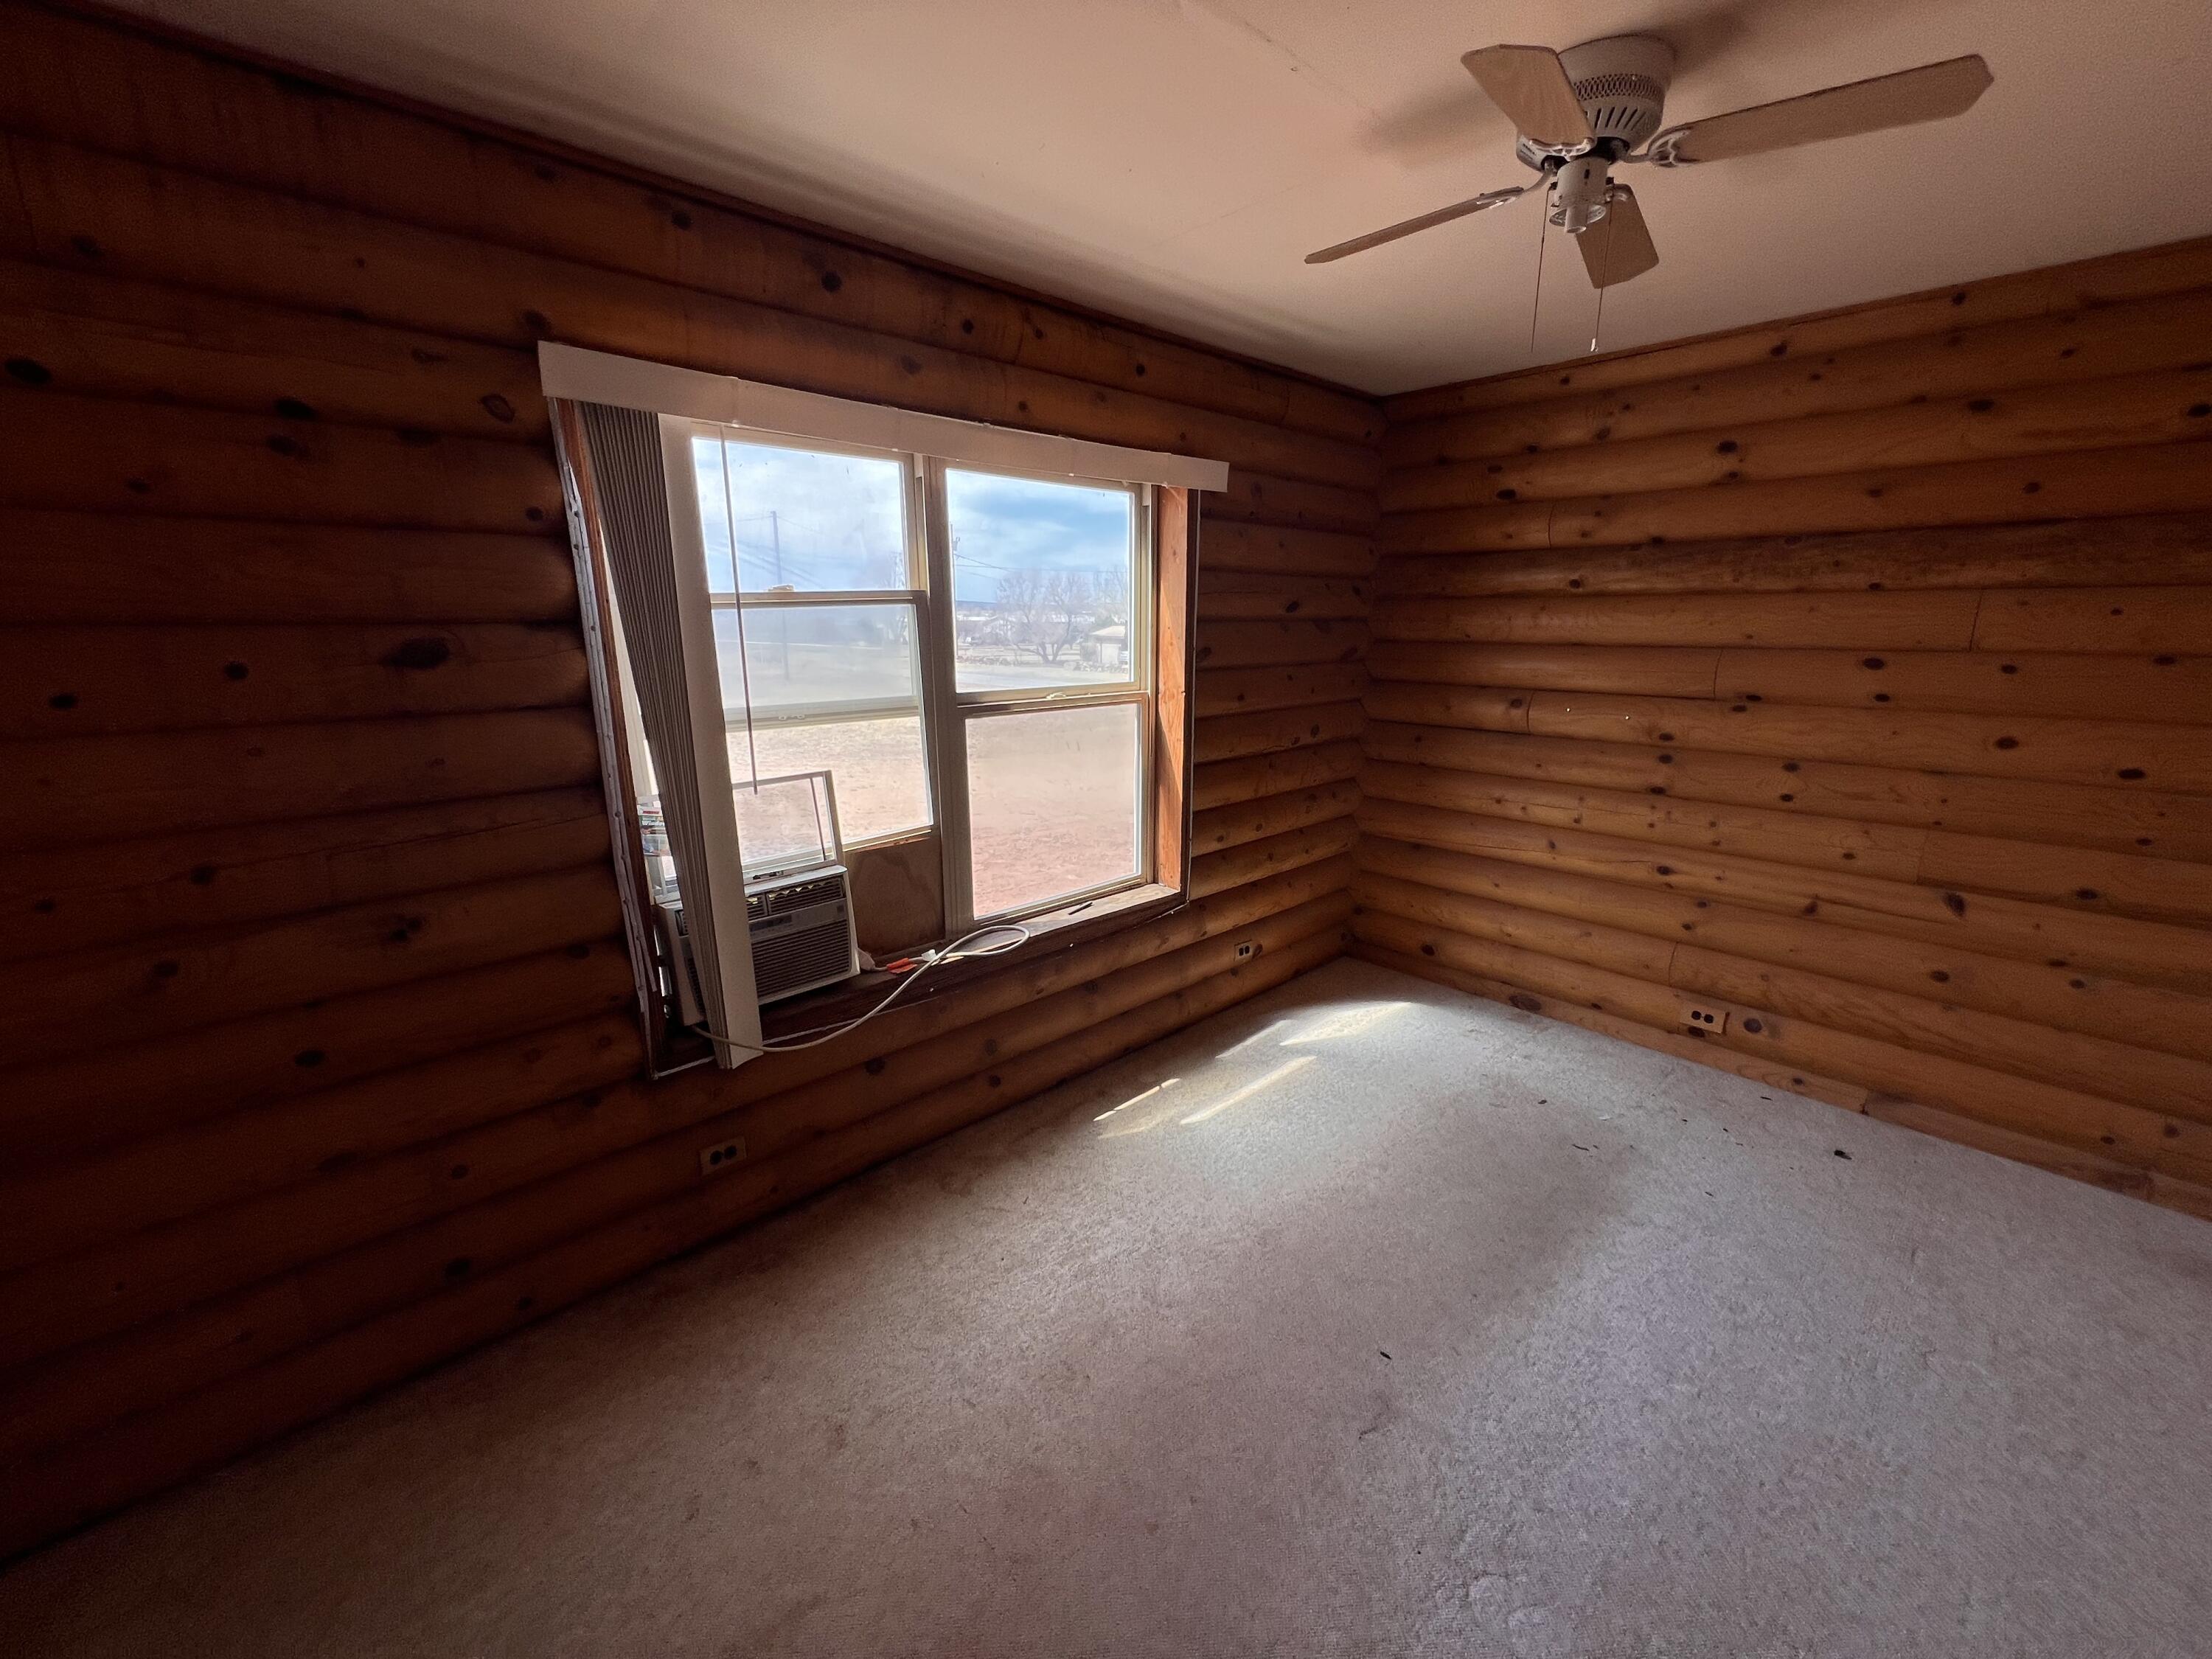 403 Boat Dock Drive, Conchas Dam, New Mexico 88416, 2 Bedrooms Bedrooms, ,2 BathroomsBathrooms,Residential,For Sale,403 Boat Dock Drive,1059754